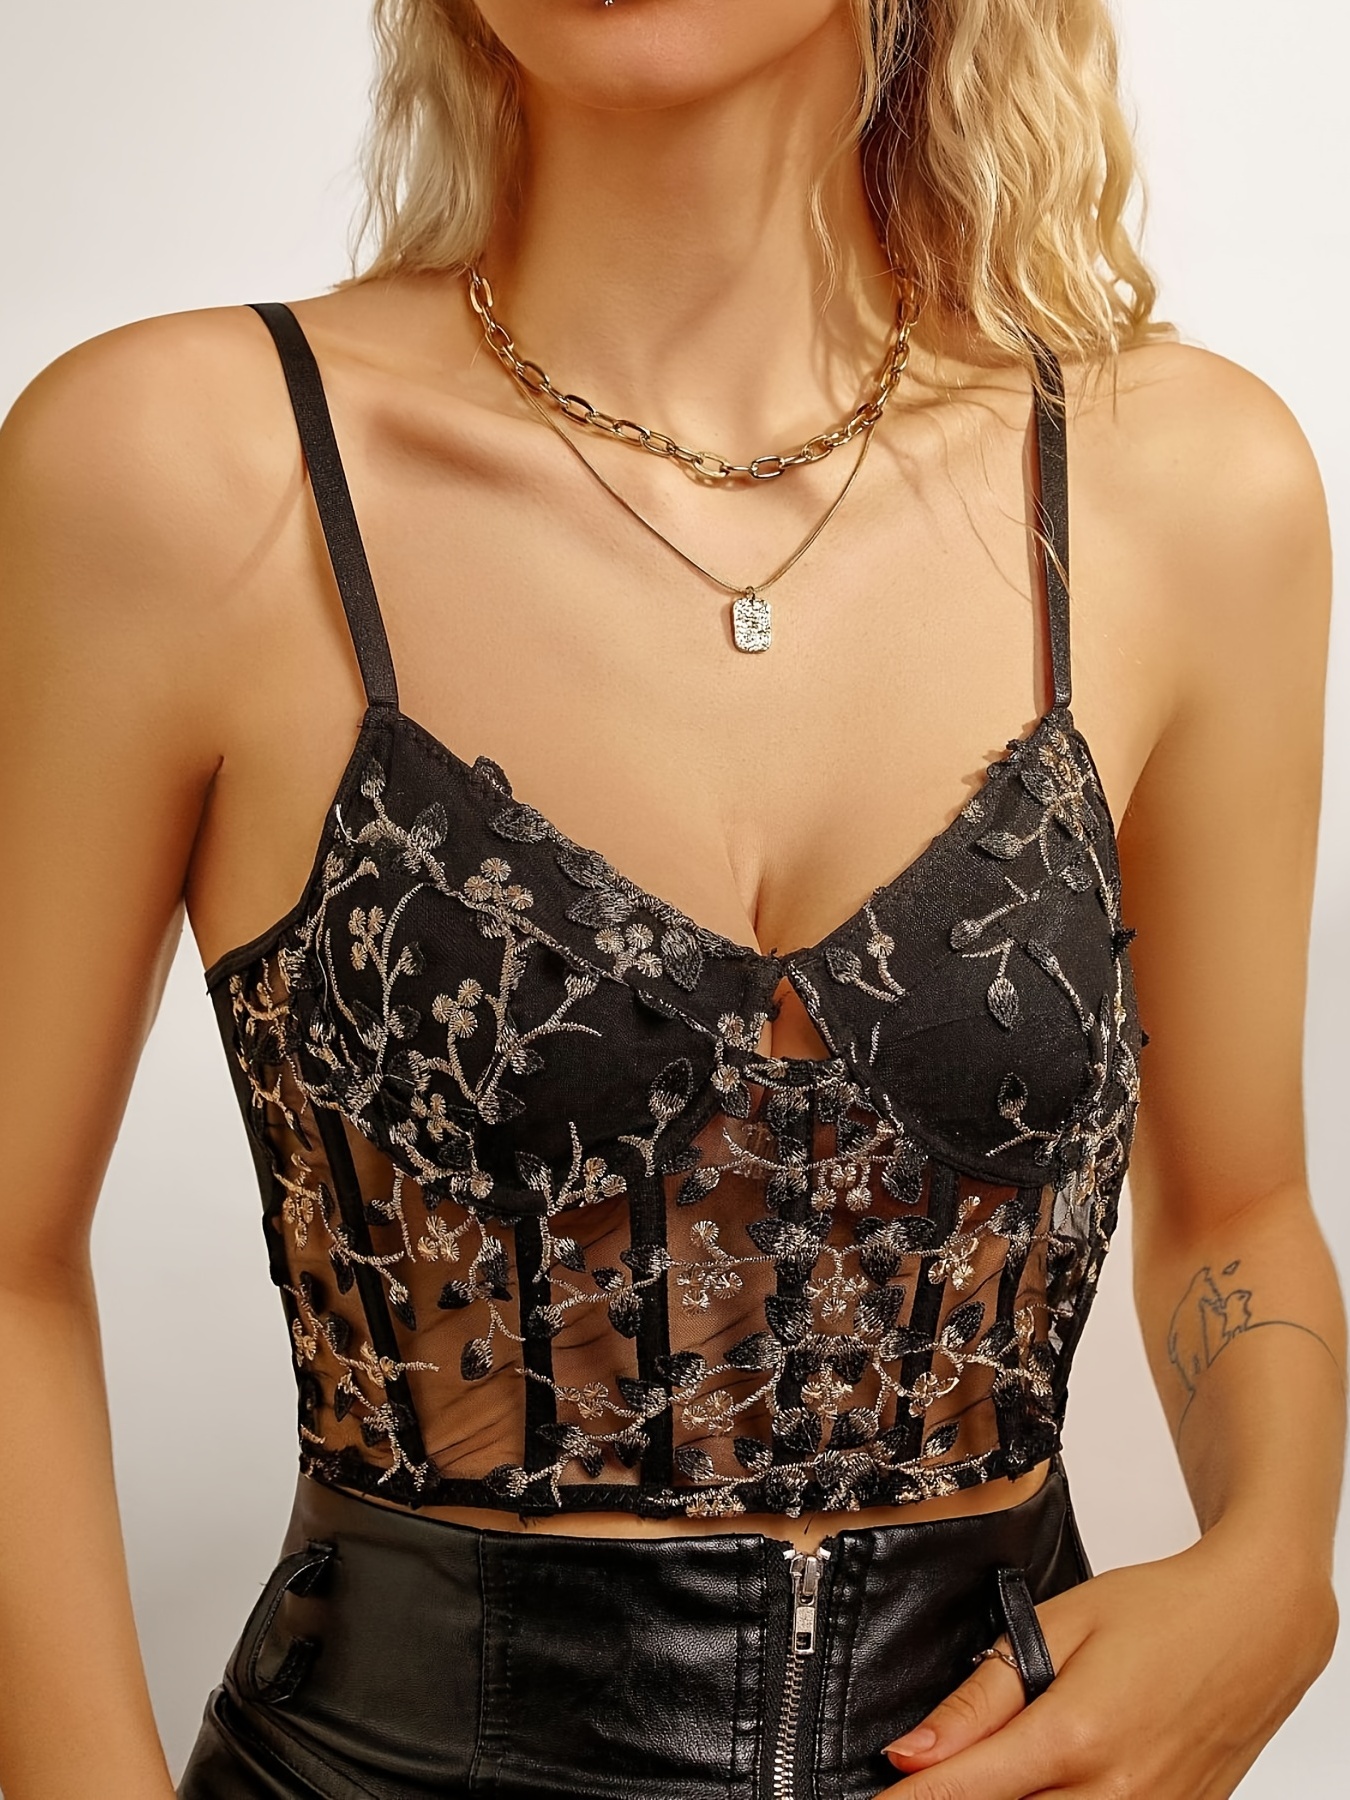 NEW Sexy Lace Short Crop Top Camisole Padded Hollow Out Soft Vest Tops For Women  Built In Bra Bustier Crop Tops B8 SV003767 From 5,47 €